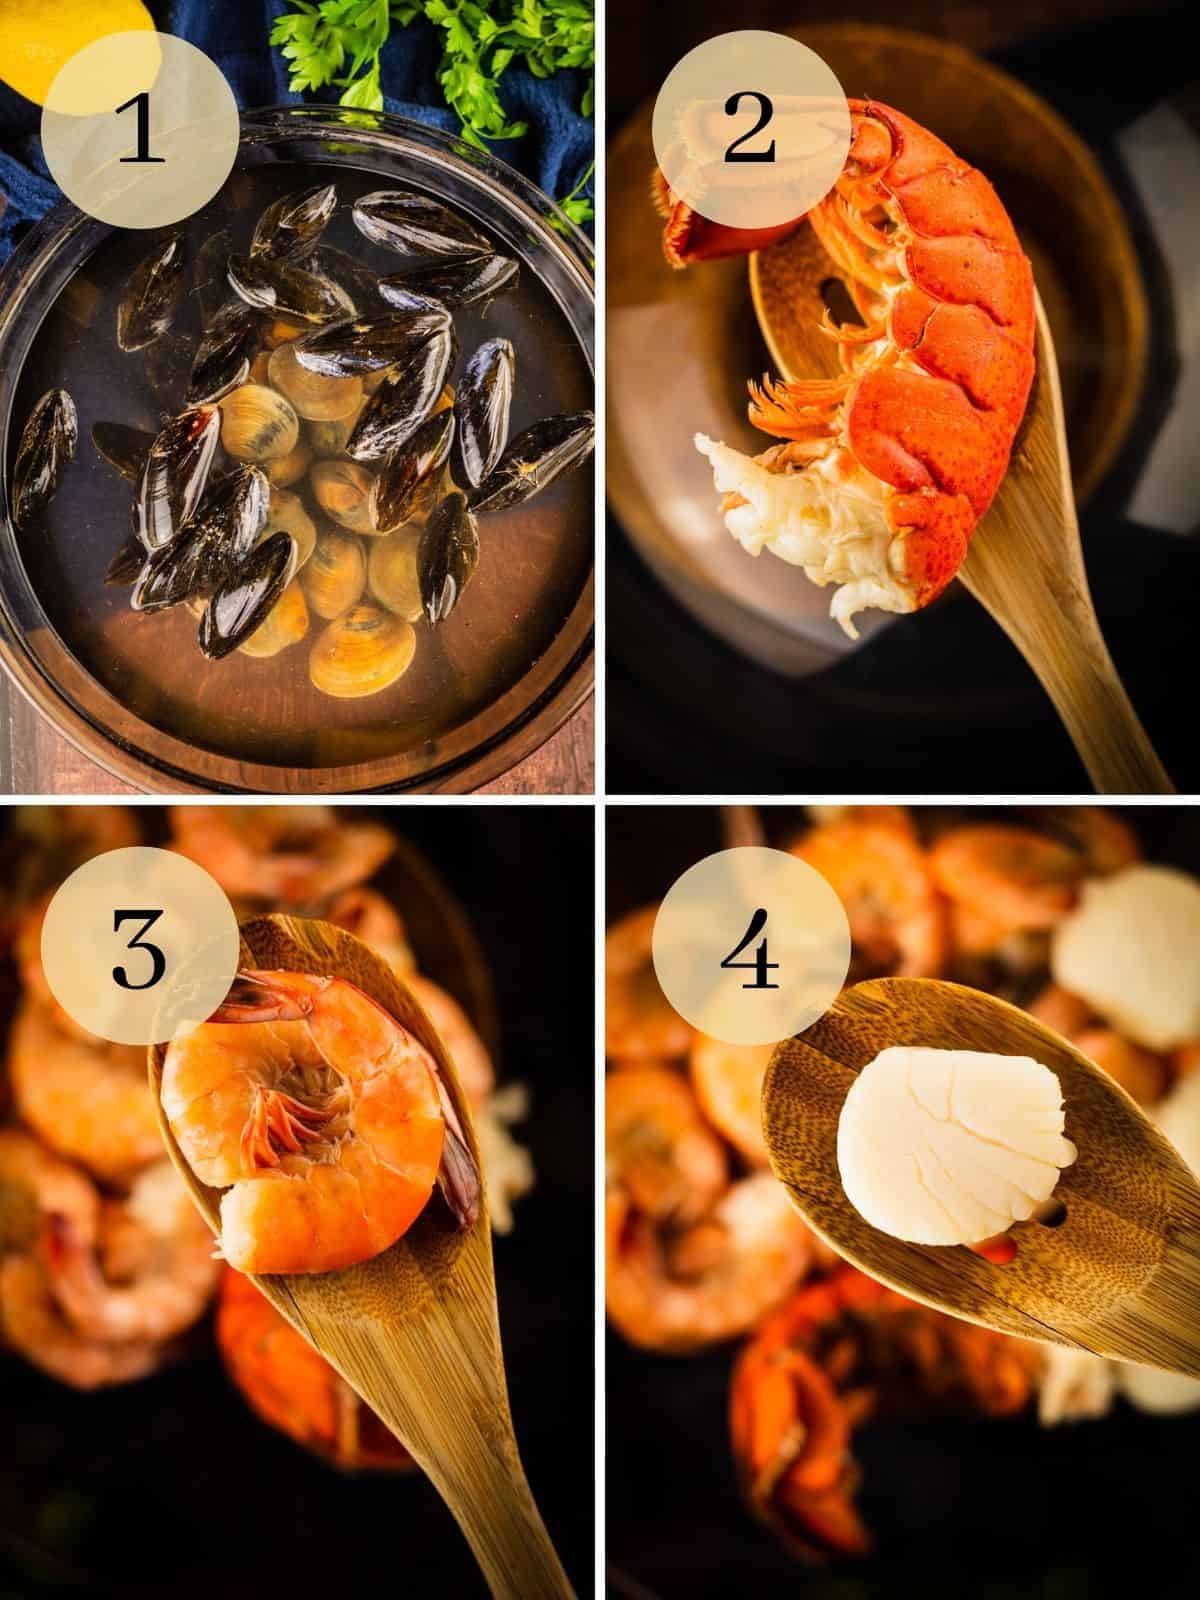 mussels and clams soaking in water and a cooked lobster tail, cook shrimp and cooked scallop